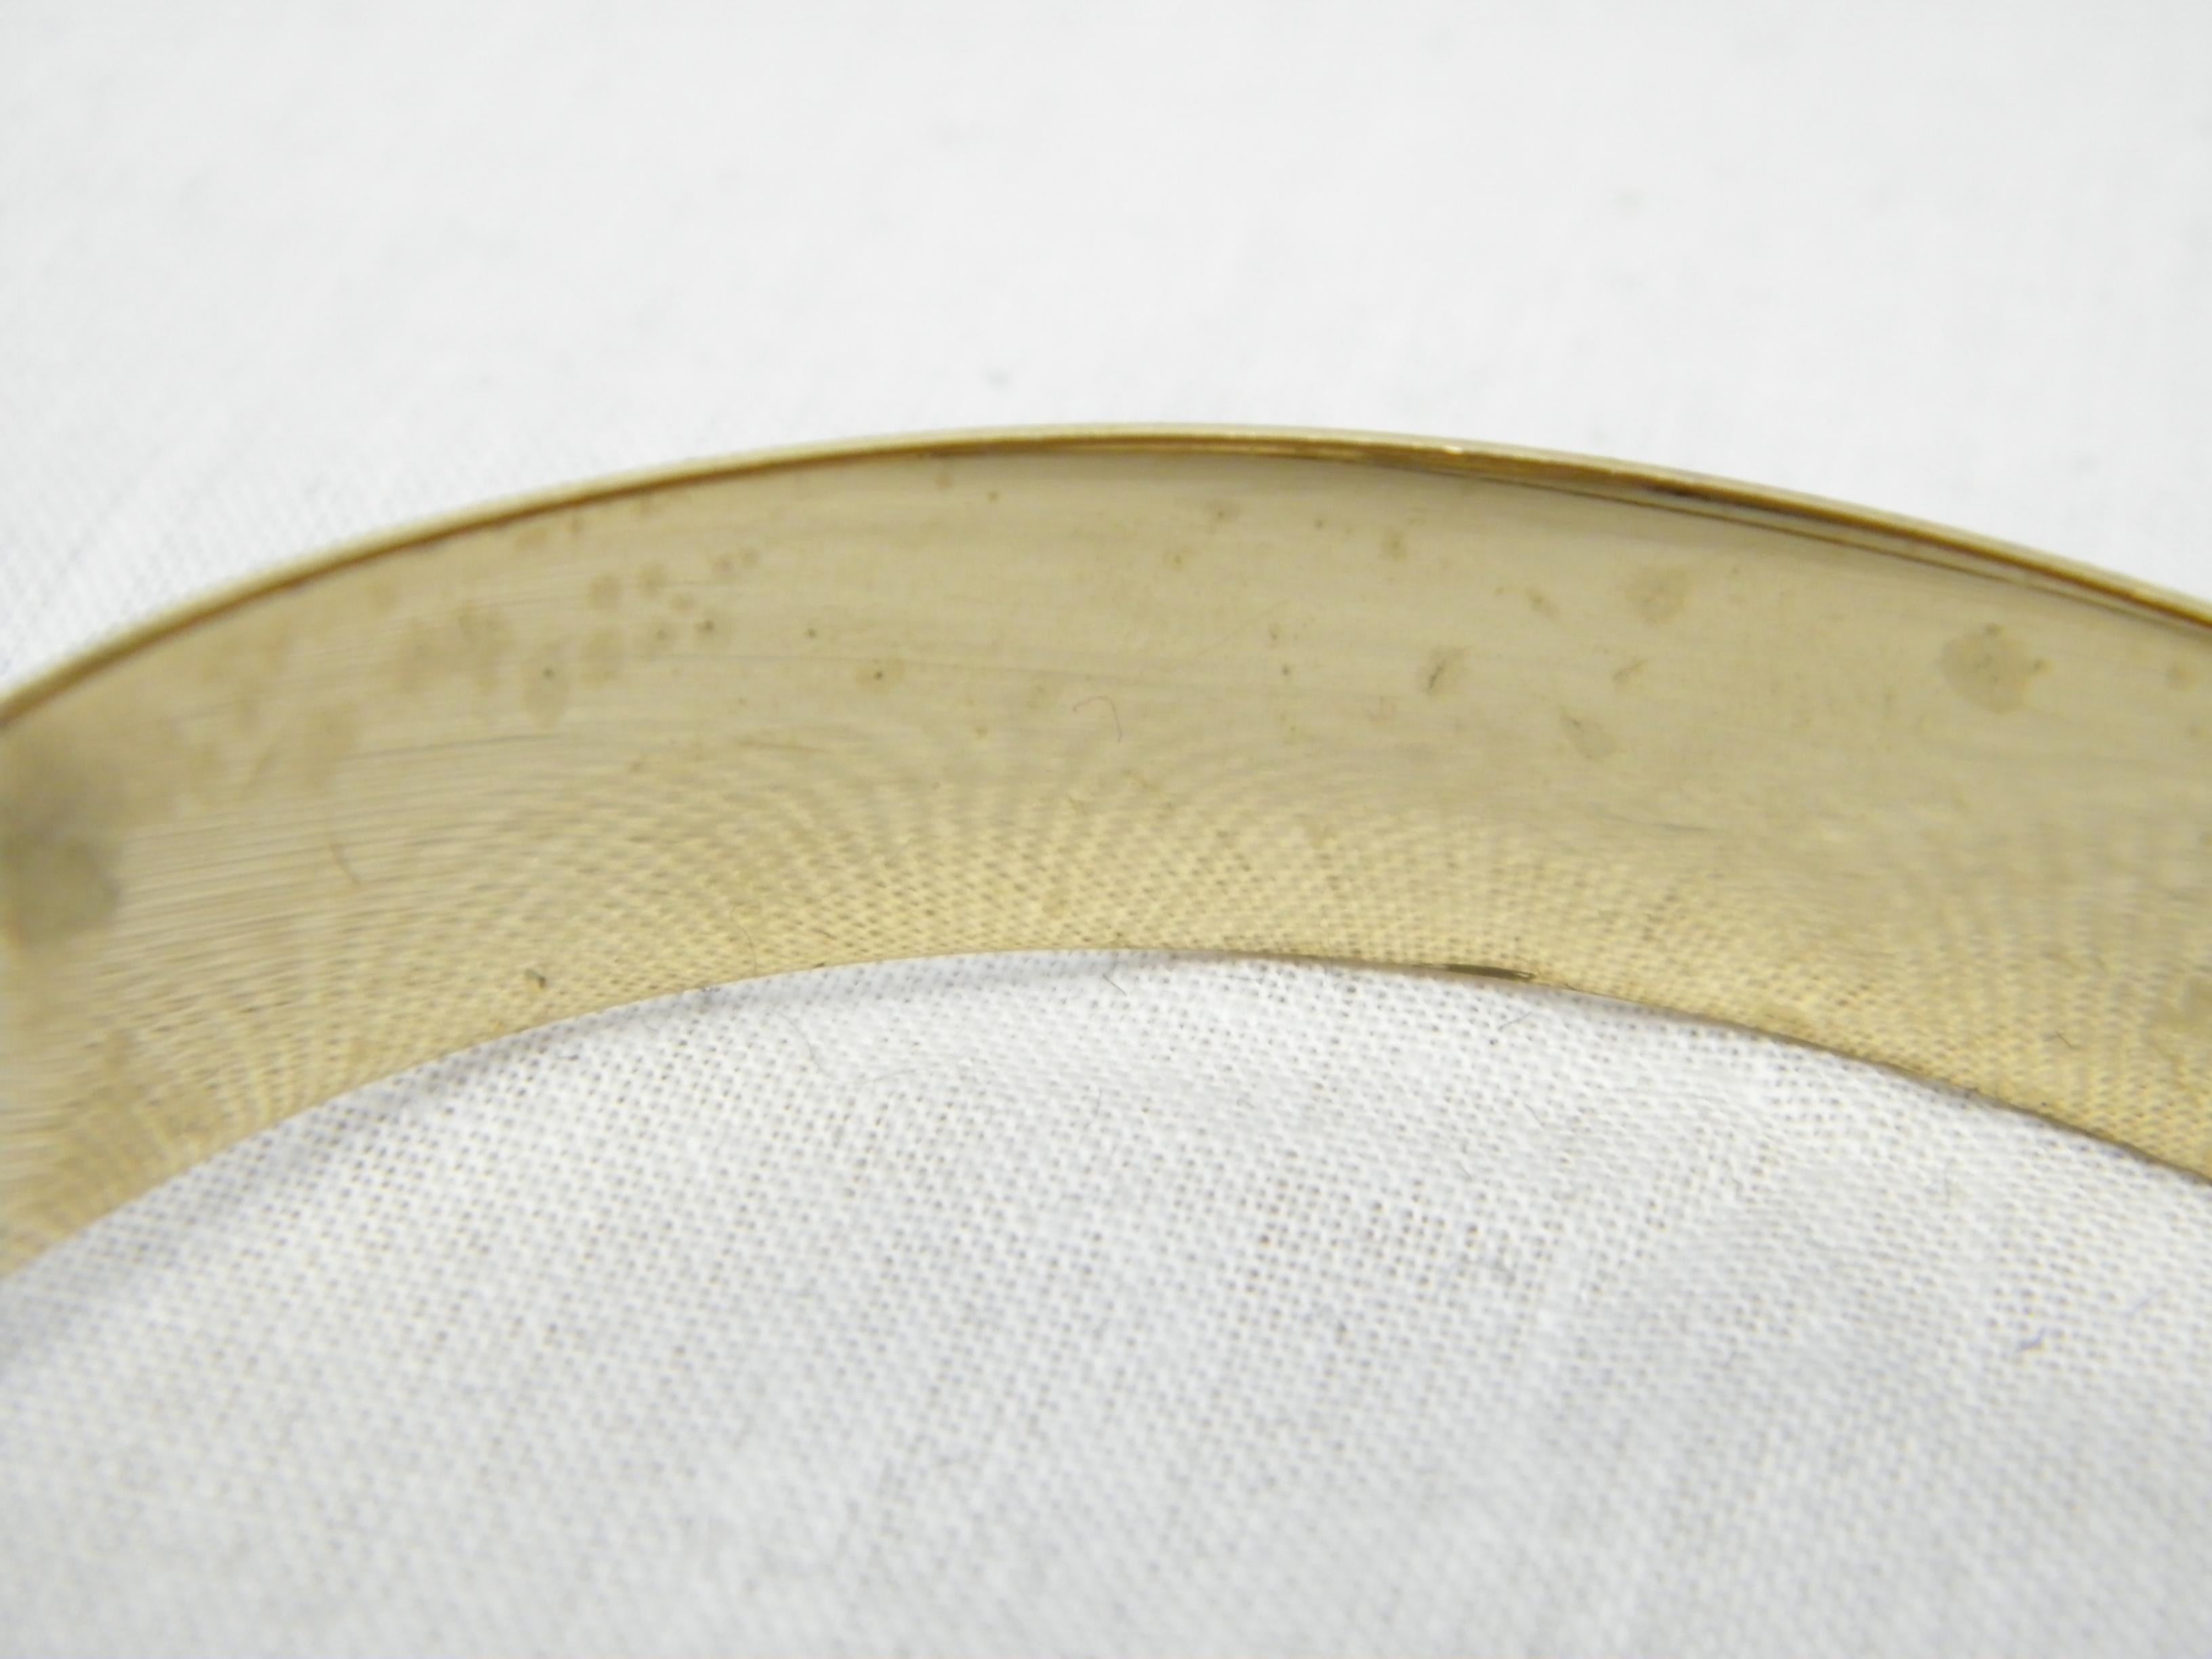 Women's or Men's Vintage 12ct Gold 'Rolled' Buckle Cuff Bracelet Bangle 500 Purity Heavy 21g For Sale